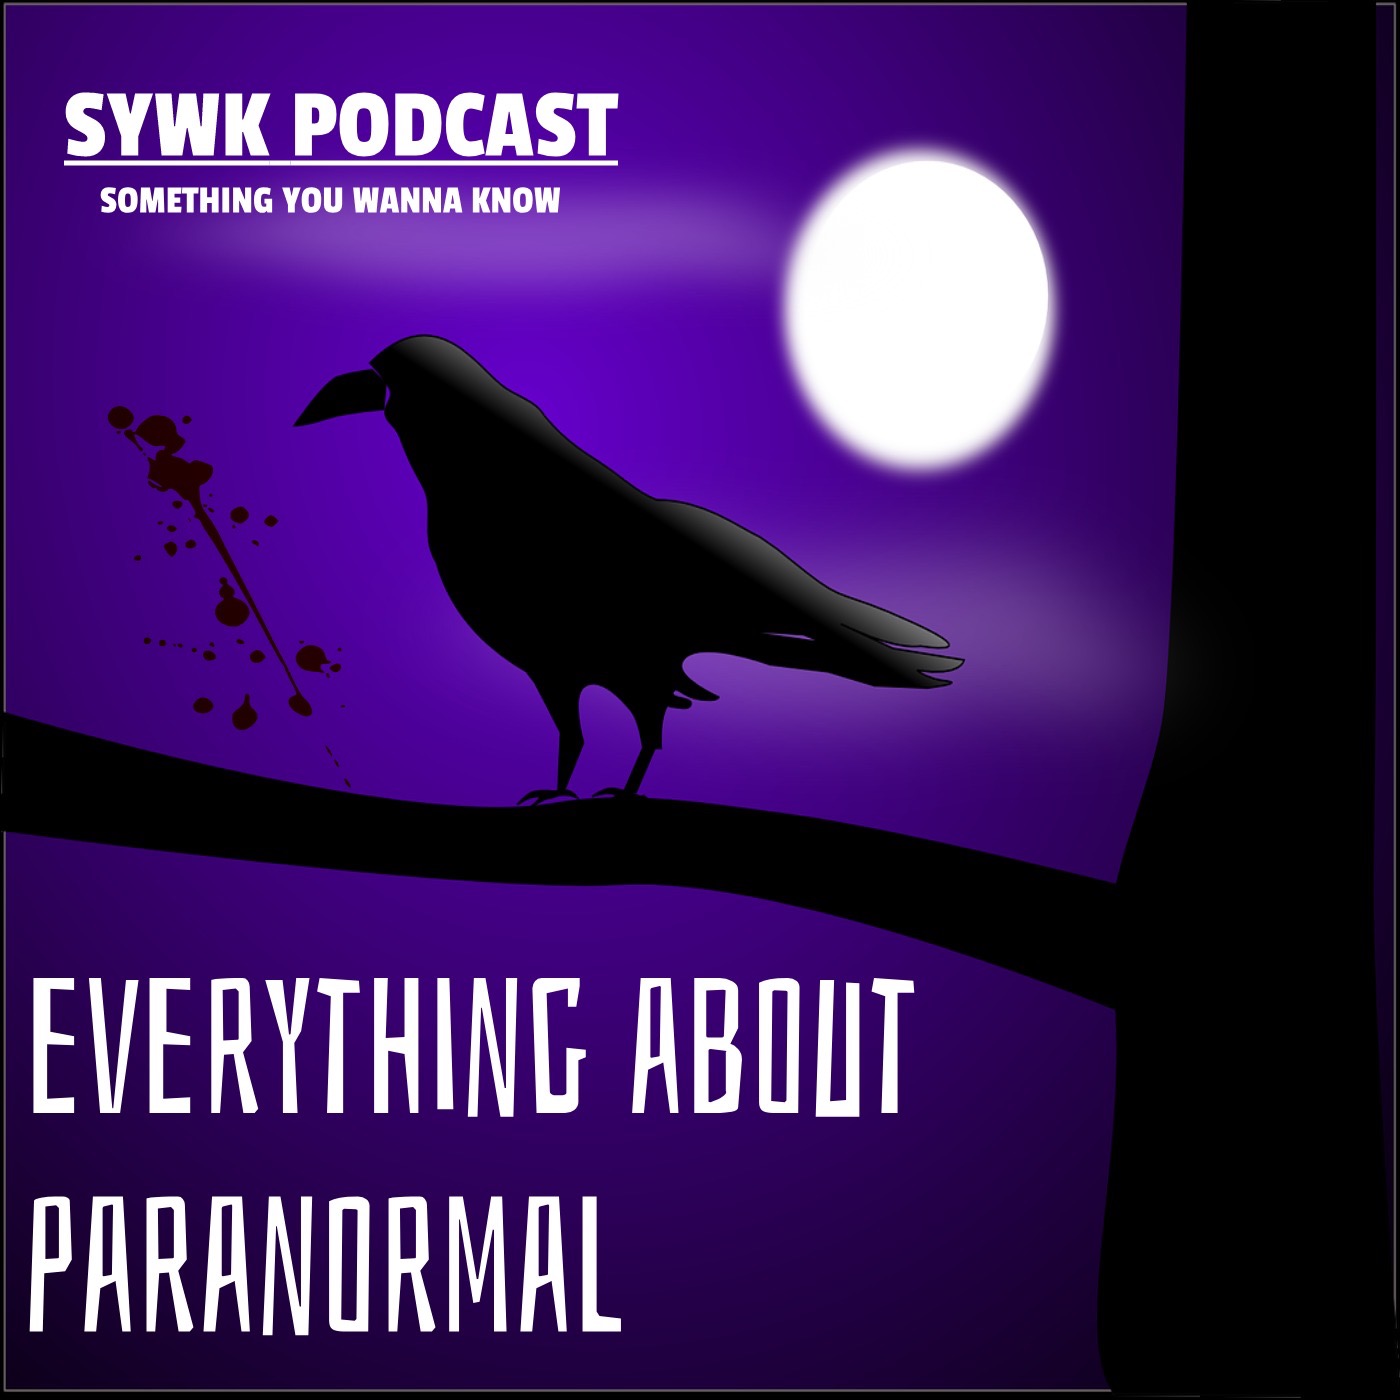 100th Episode Special: 2 Ghost Stories, What Could Go Wrong?